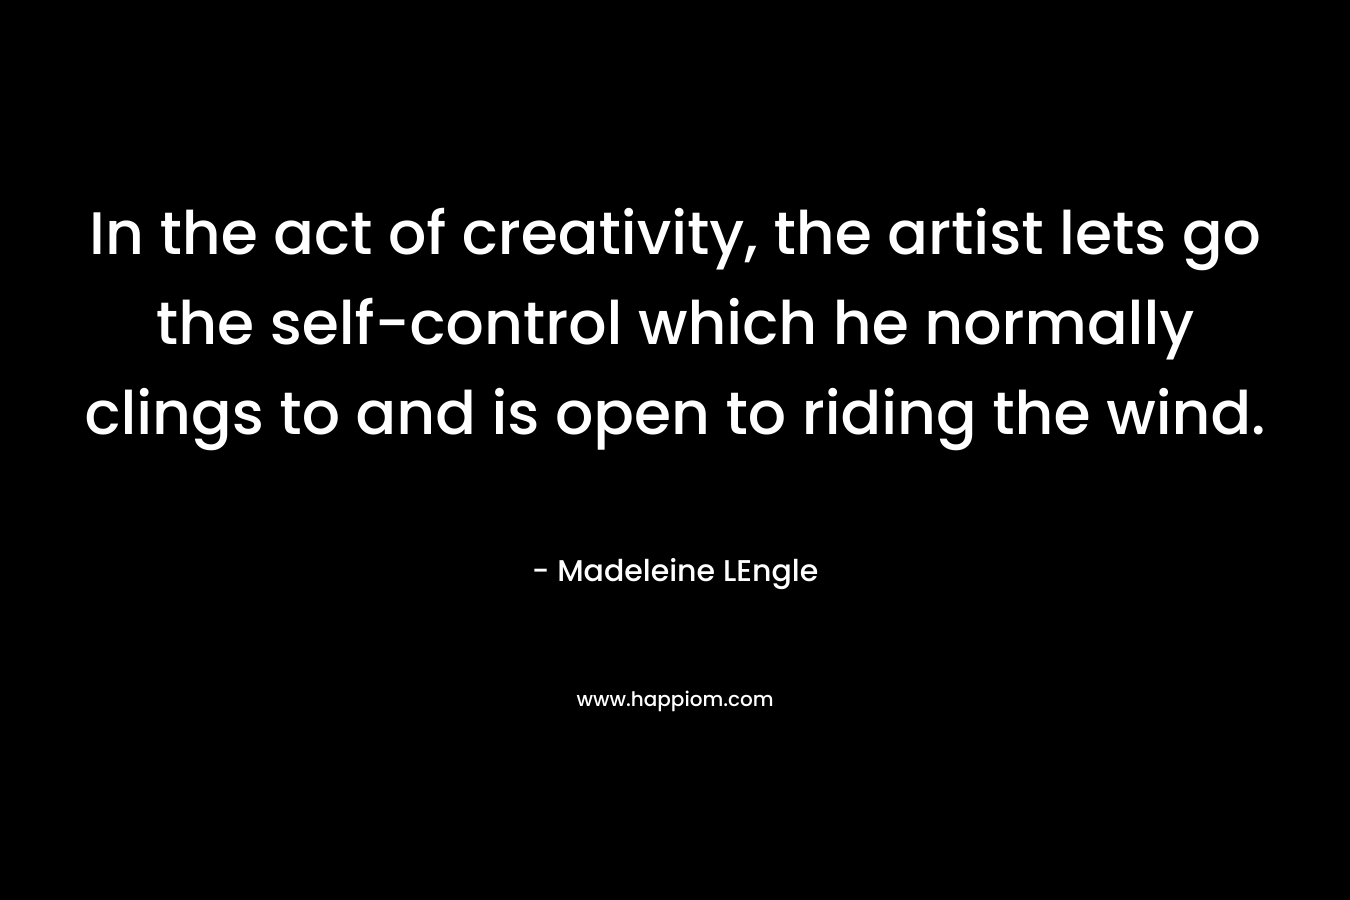 In the act of creativity, the artist lets go the self-control which he normally clings to and is open to riding the wind.